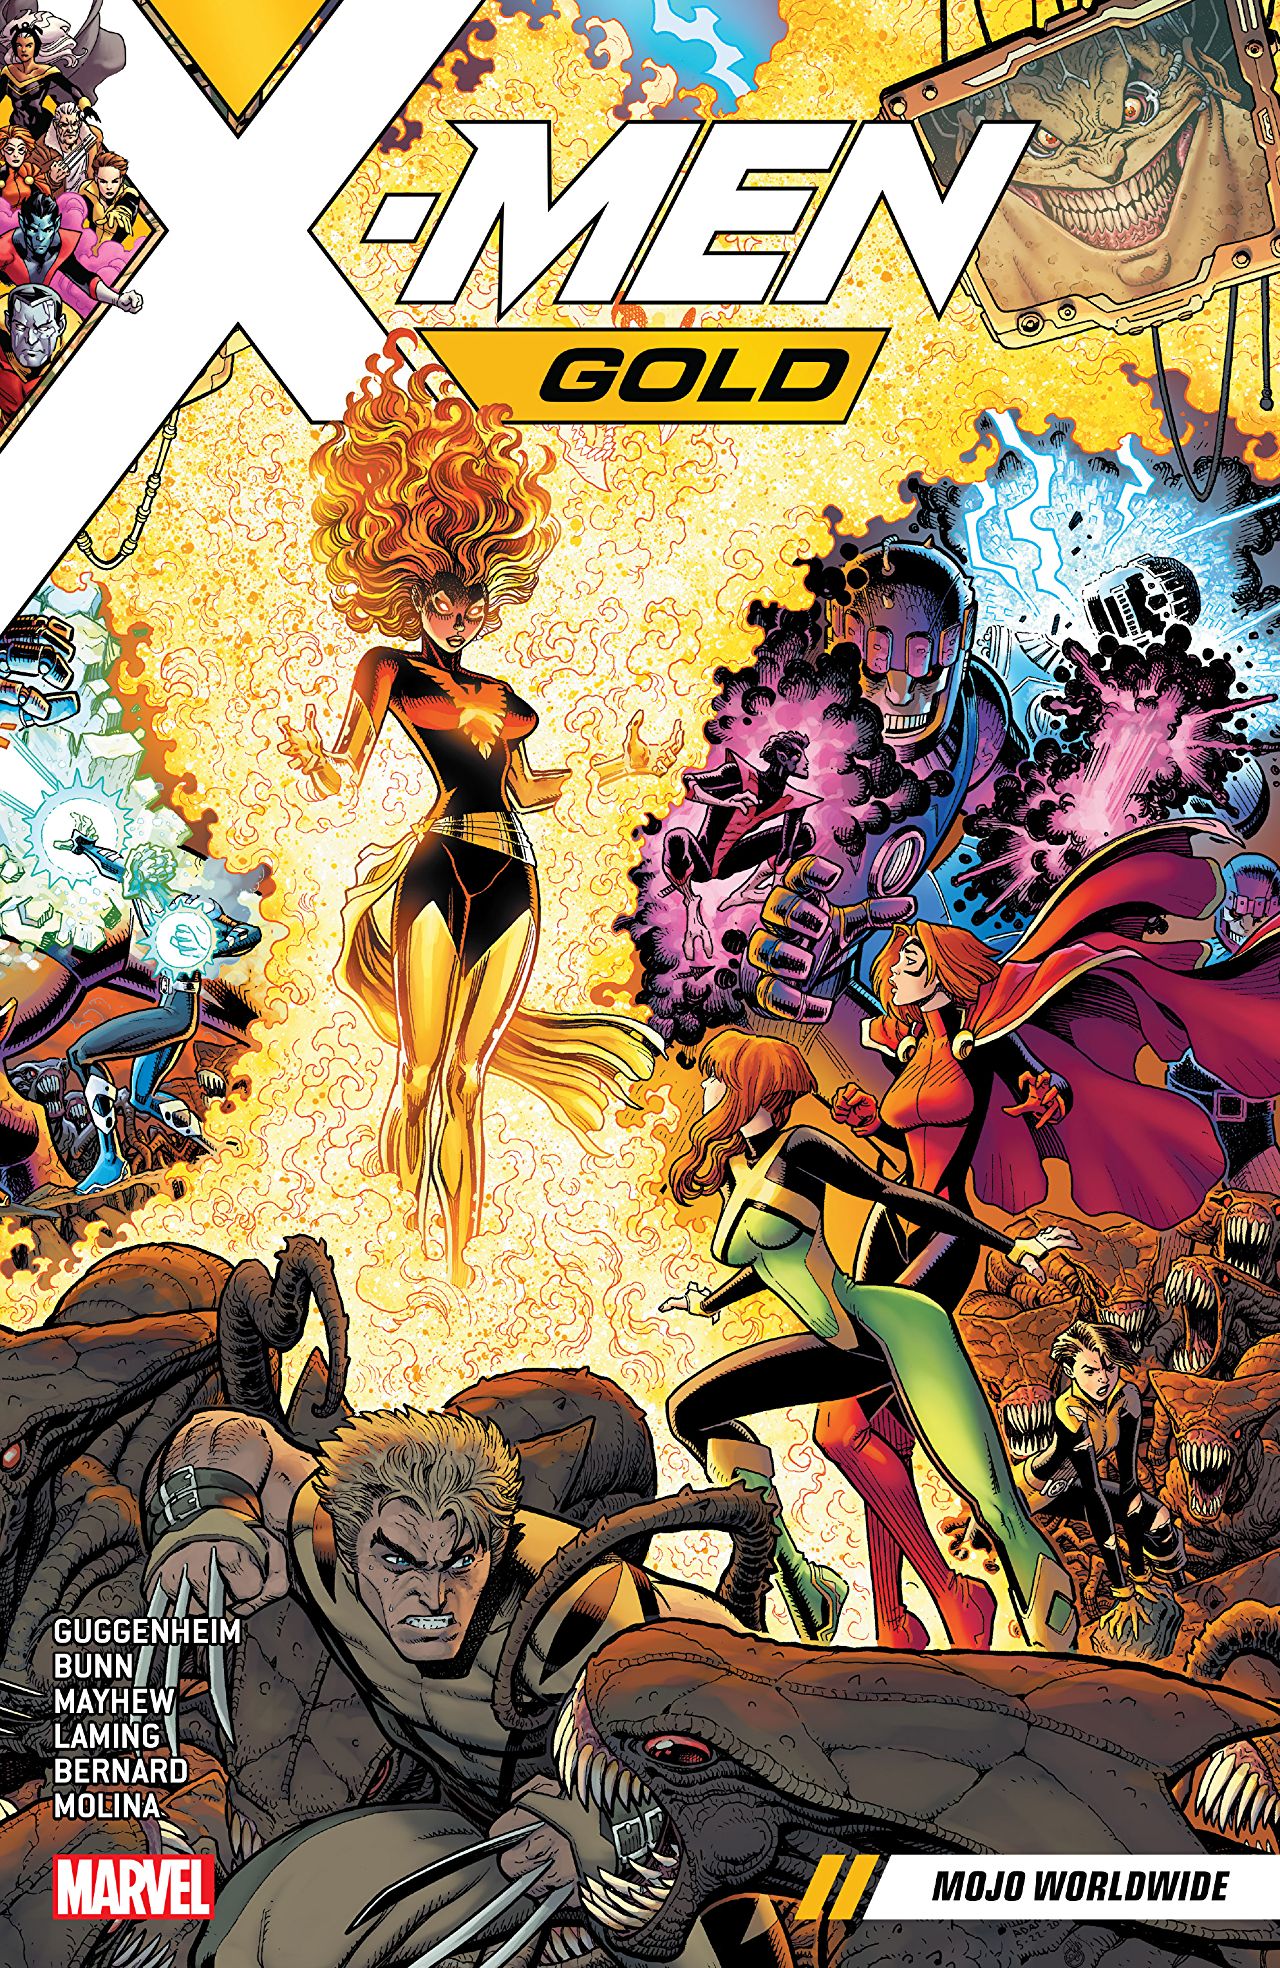 'X-Men Gold Vol. 3: Mojo Worldwide' review: the greatest hits album no one asked for